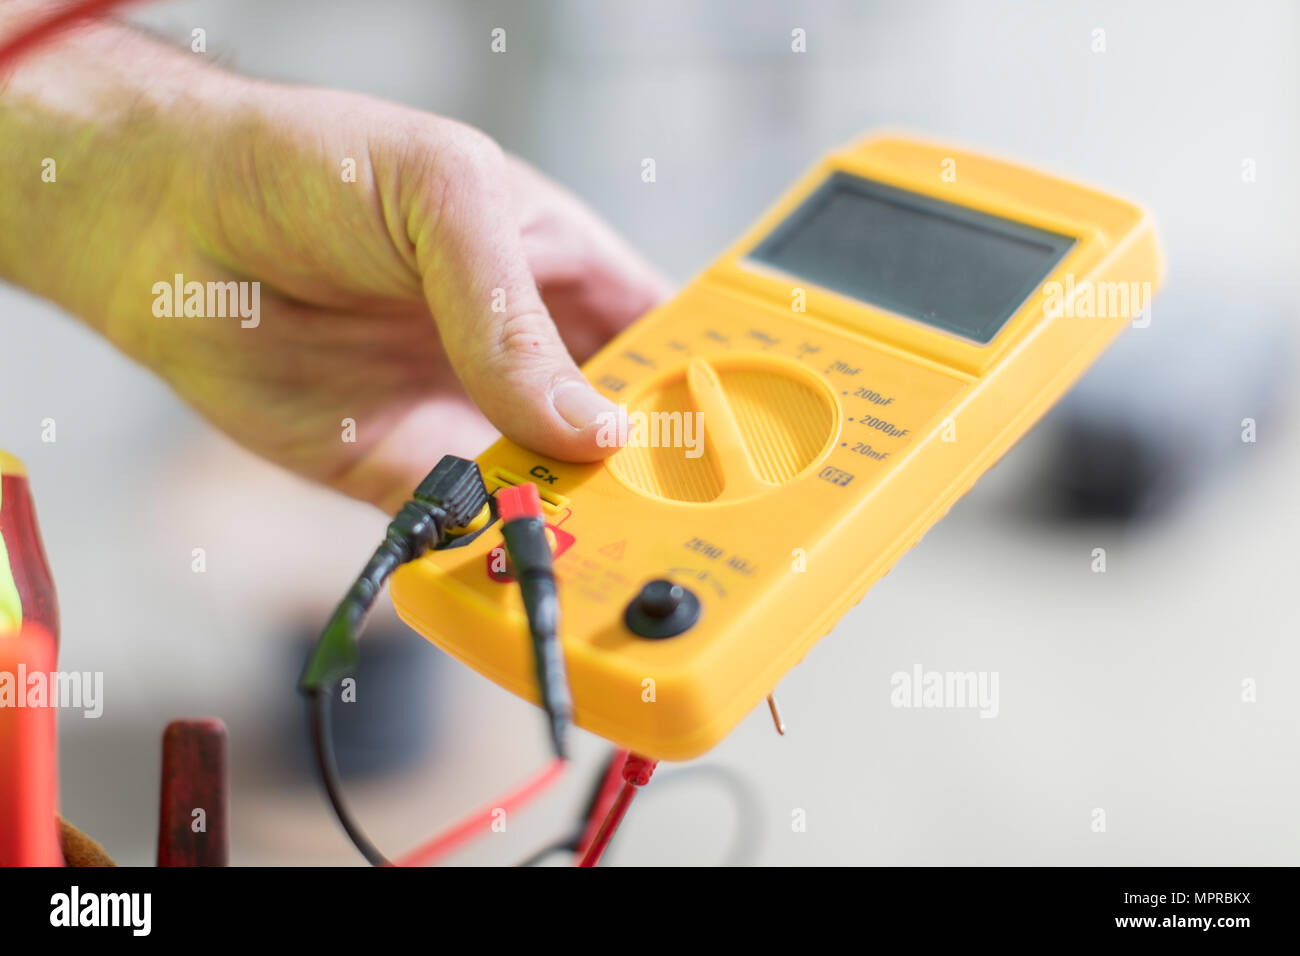 Close-up of electrician holding voltmeter Stock Photo